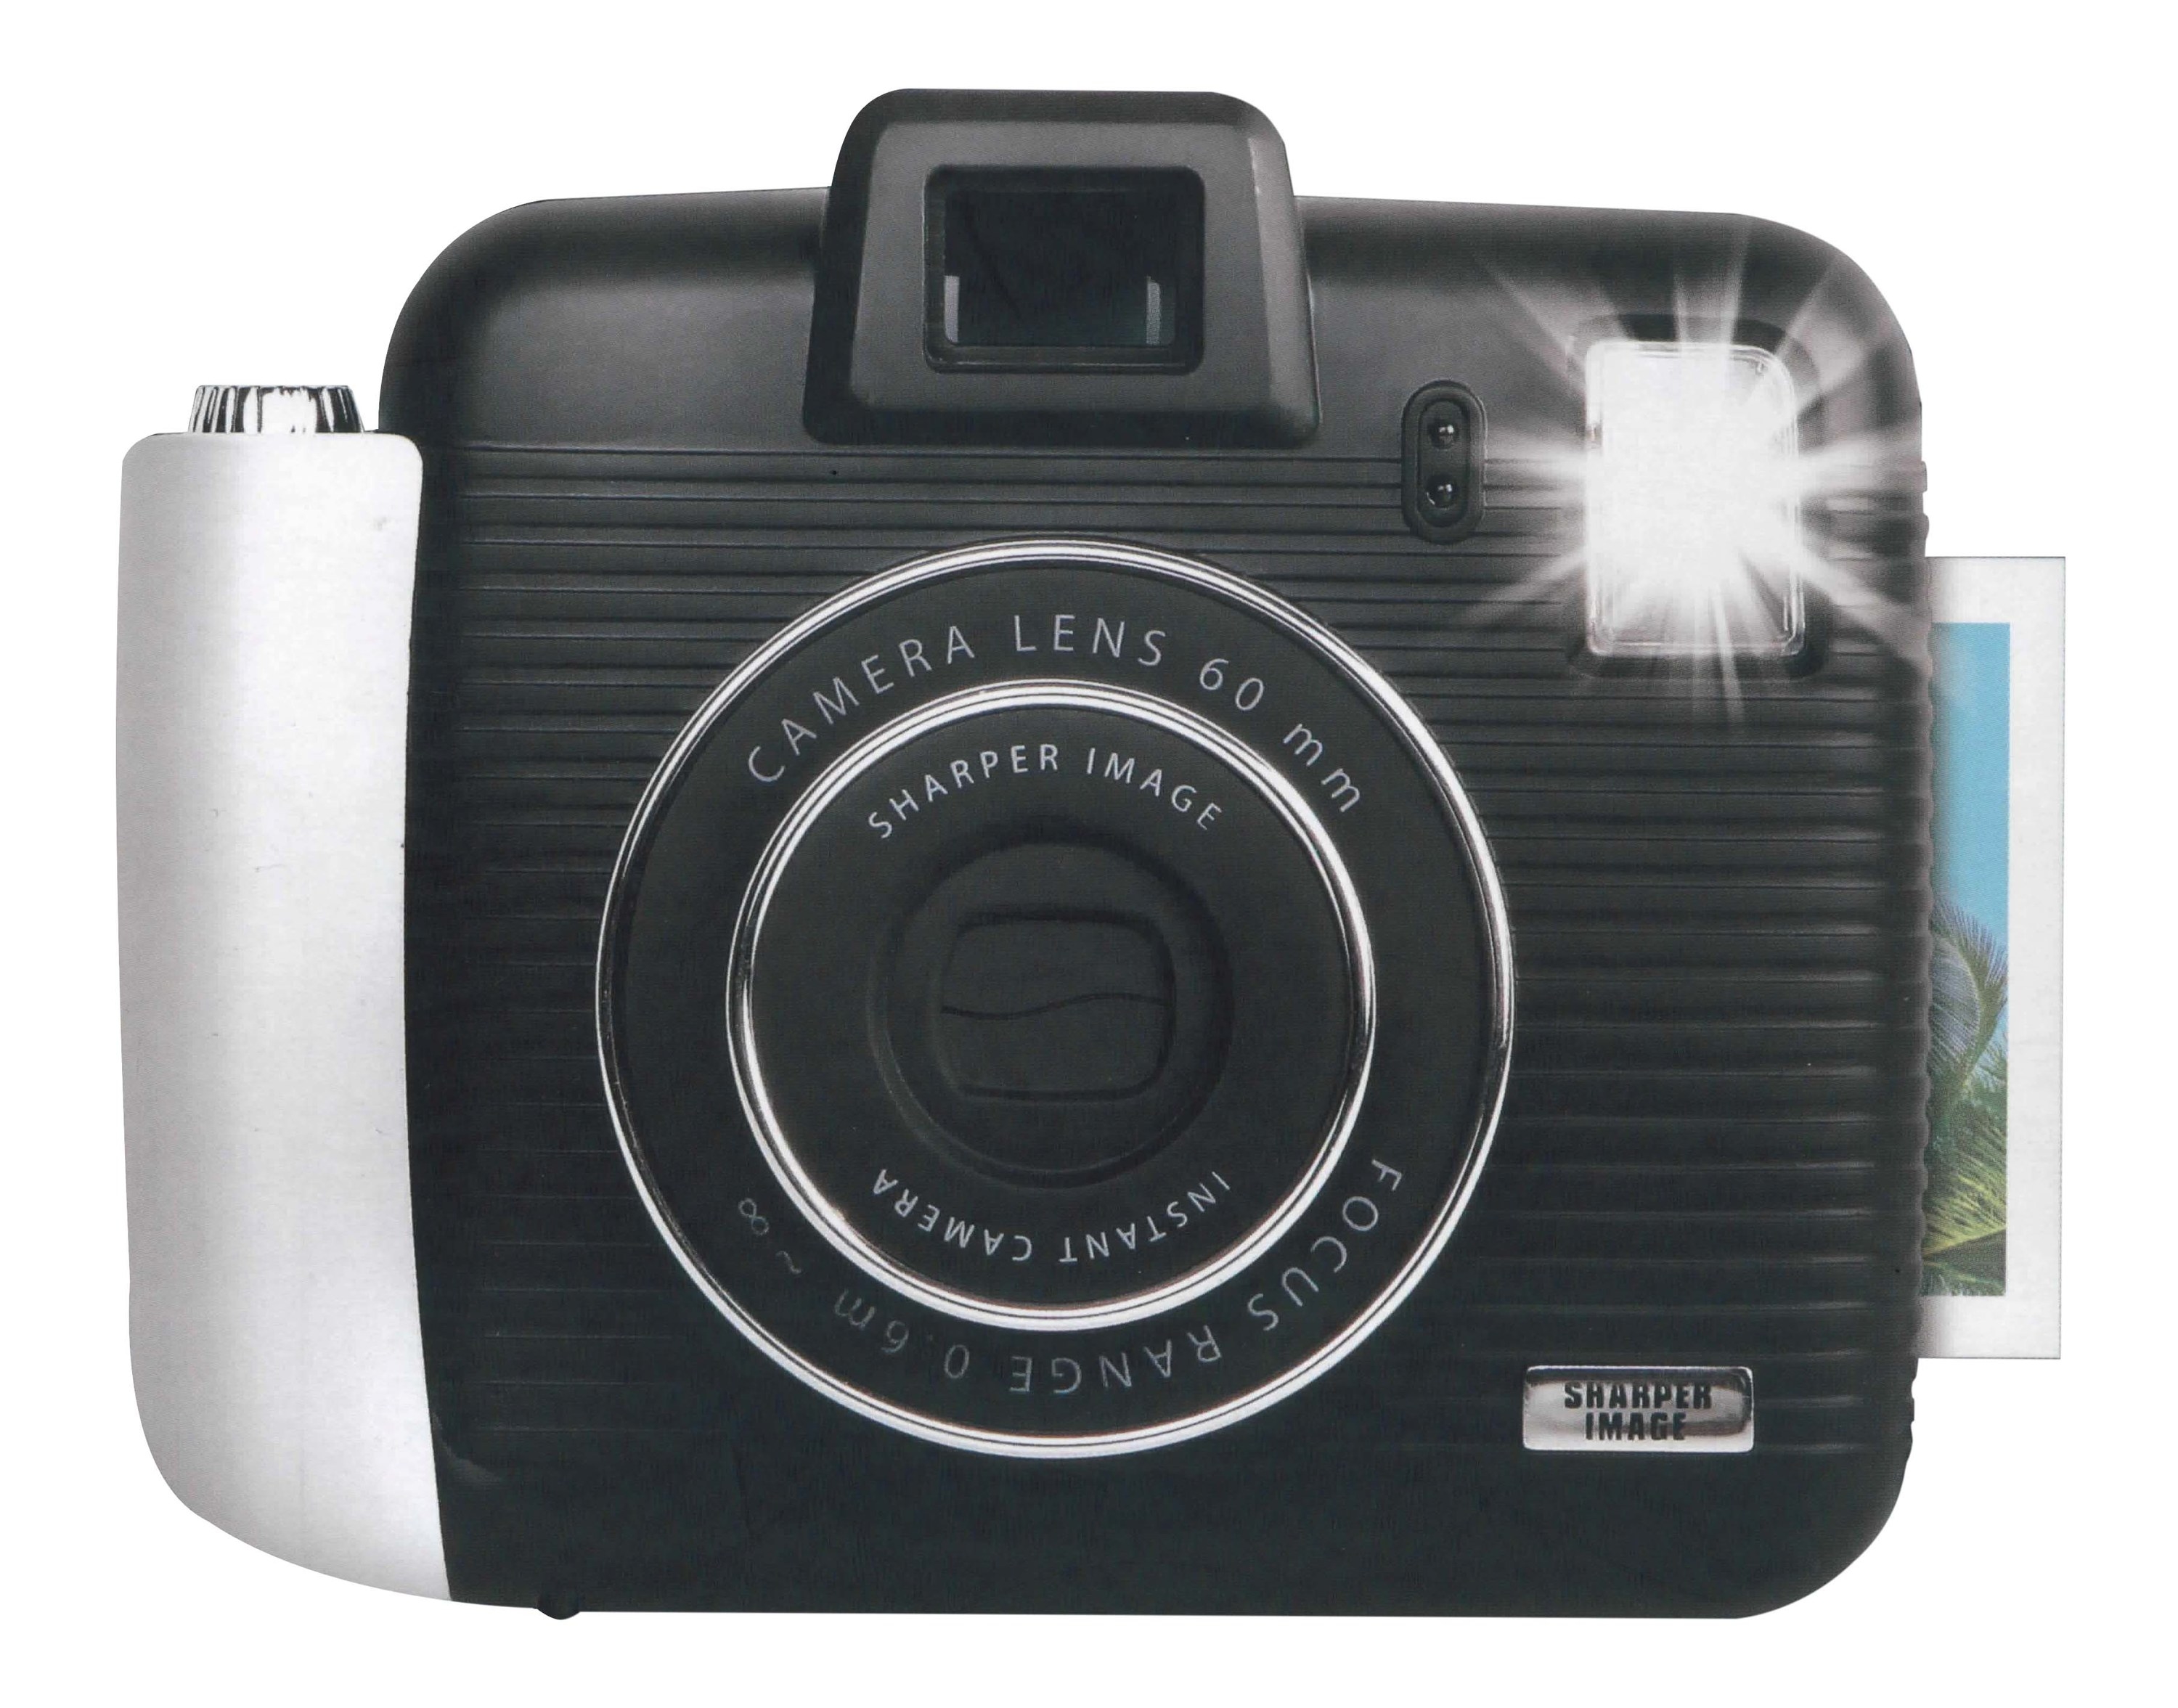 The small black and silver camera with an image printing from the side